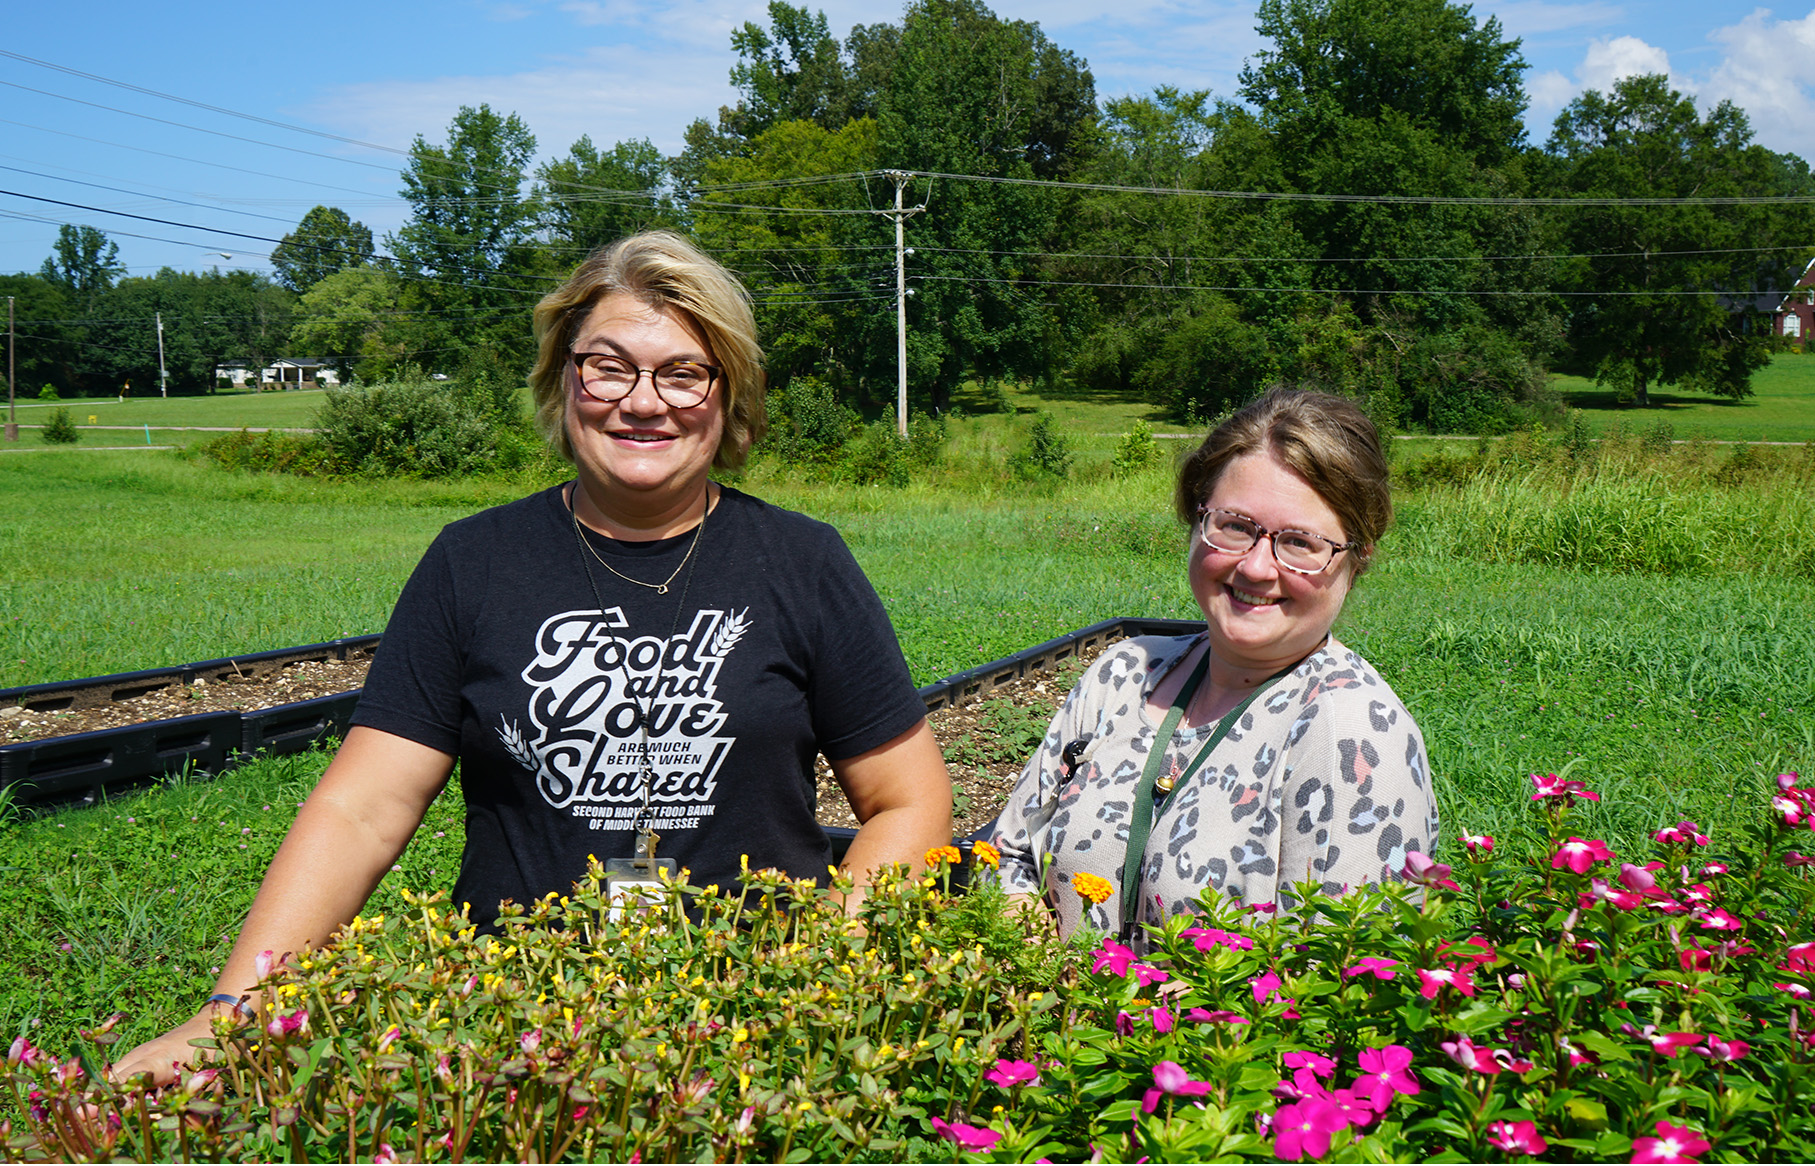 Donna Vick (left) and Jennifer Thornton (right) stand behind a raised flower bed with yellow and pink flowers. trees and powerlines in the background